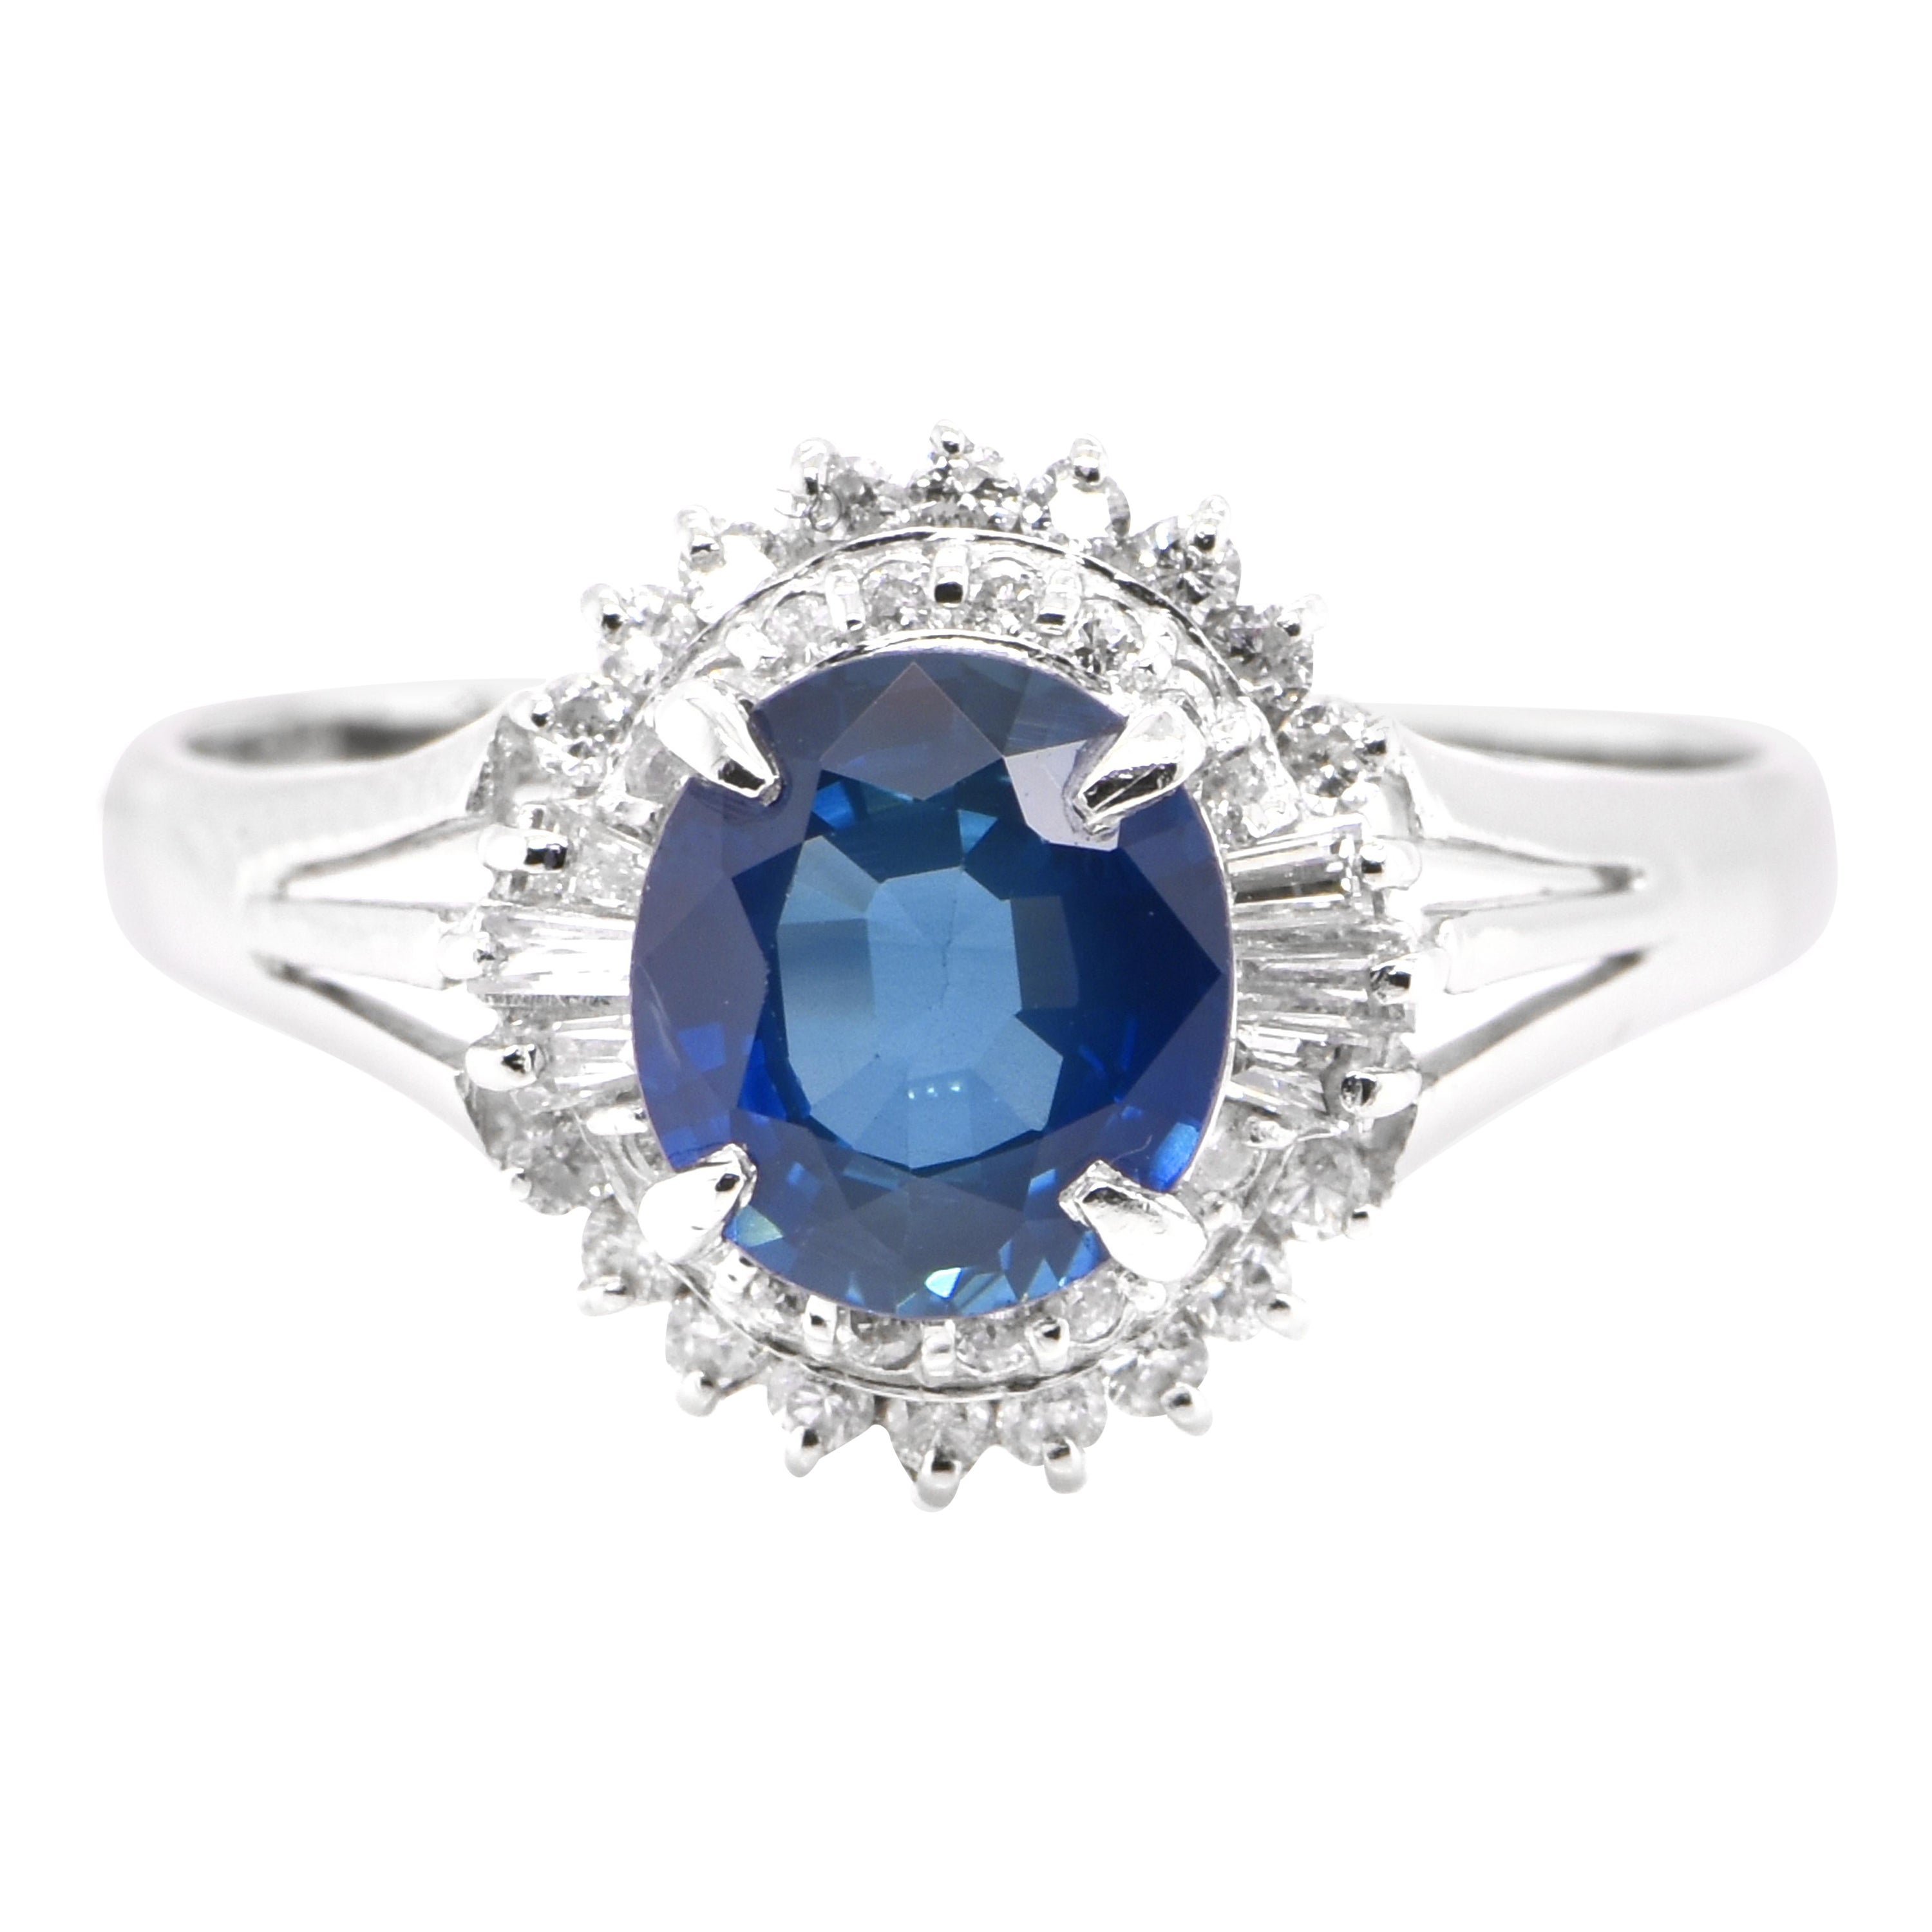 1.57 Carat Natural Sapphire and Diamond Ballerina Cocktail Ring set in Platinum For Sale